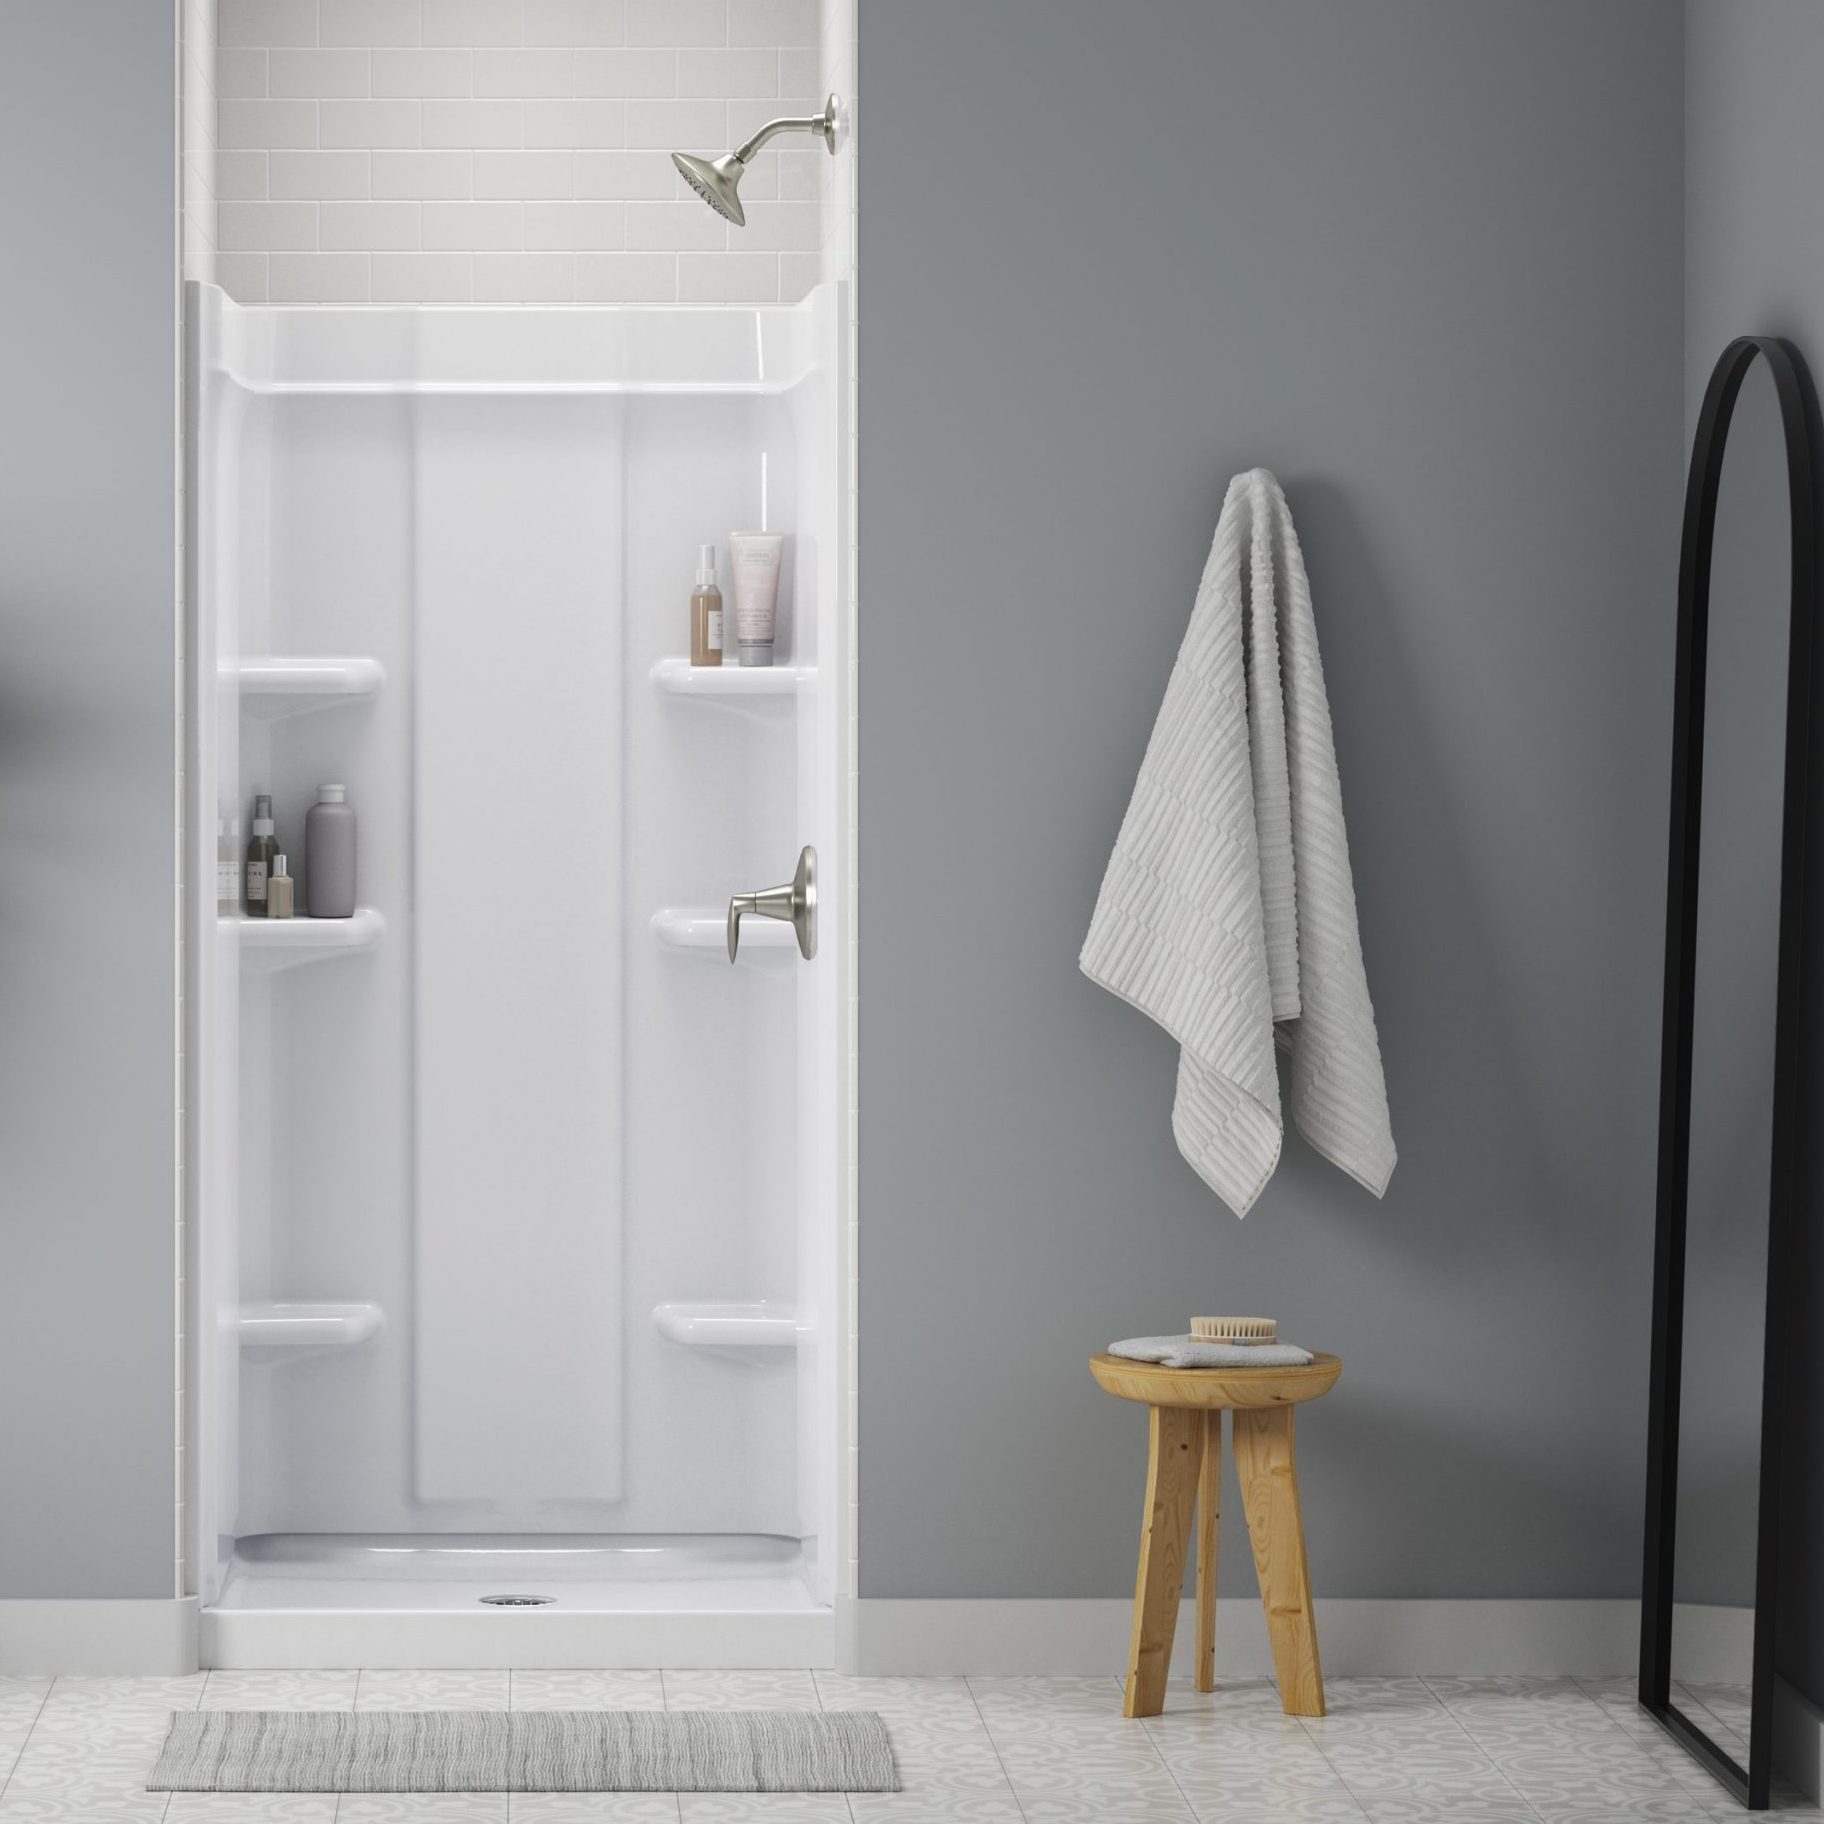 7 Best Corner Shower Shelf Options for New AND Existing Showers